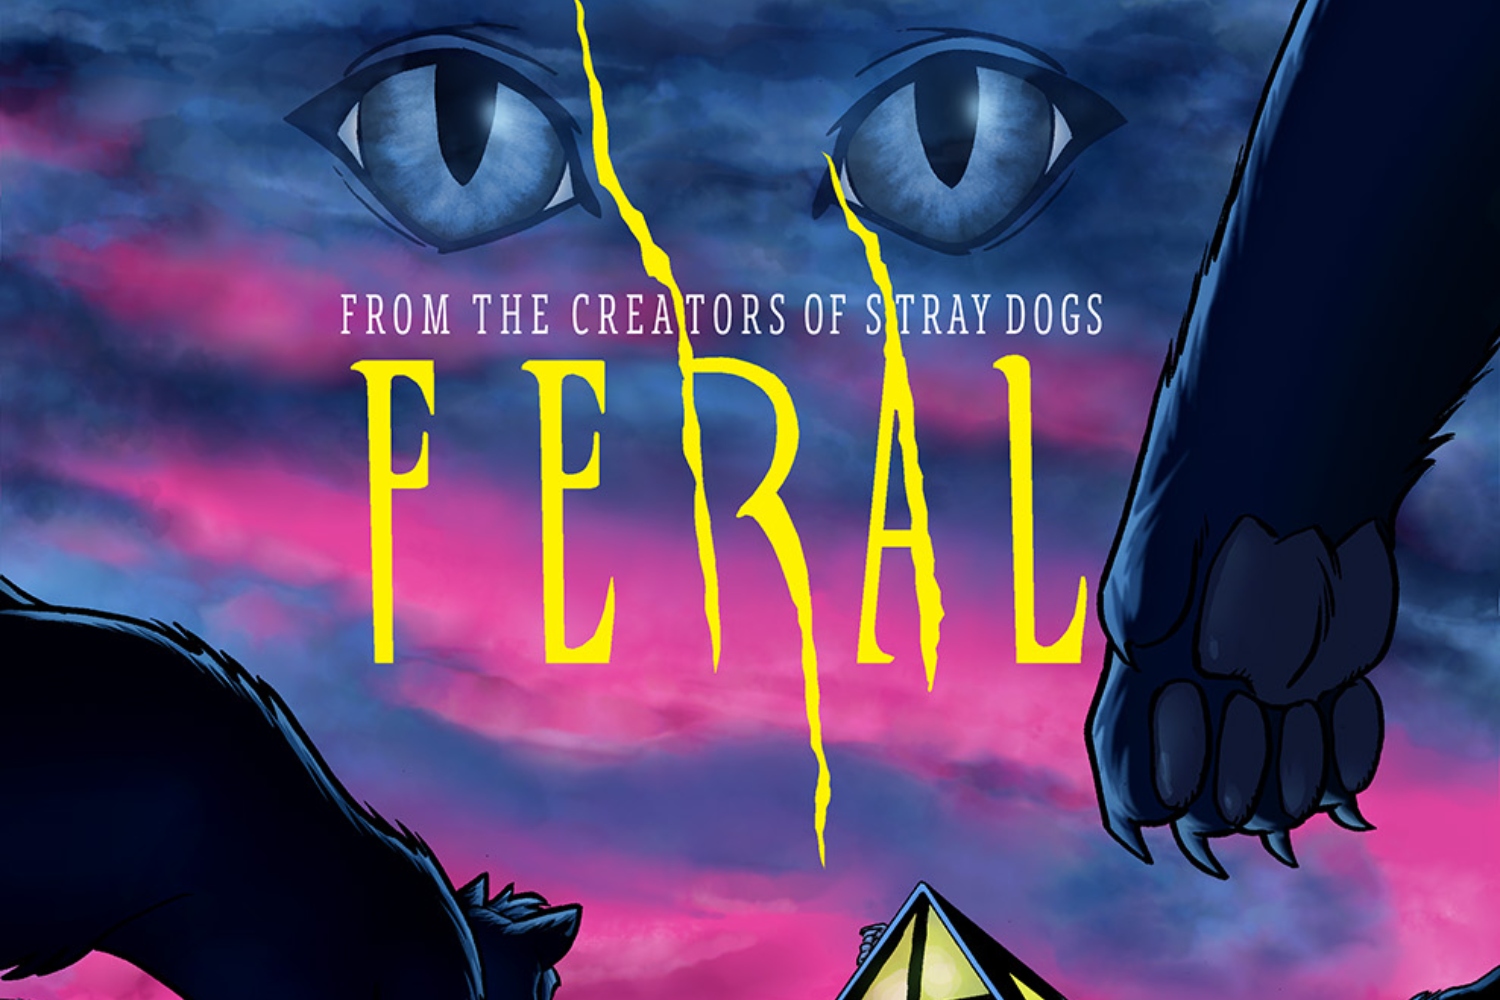 'Feral' #1 is like a real cat: cute, intense, and emotionally stirring